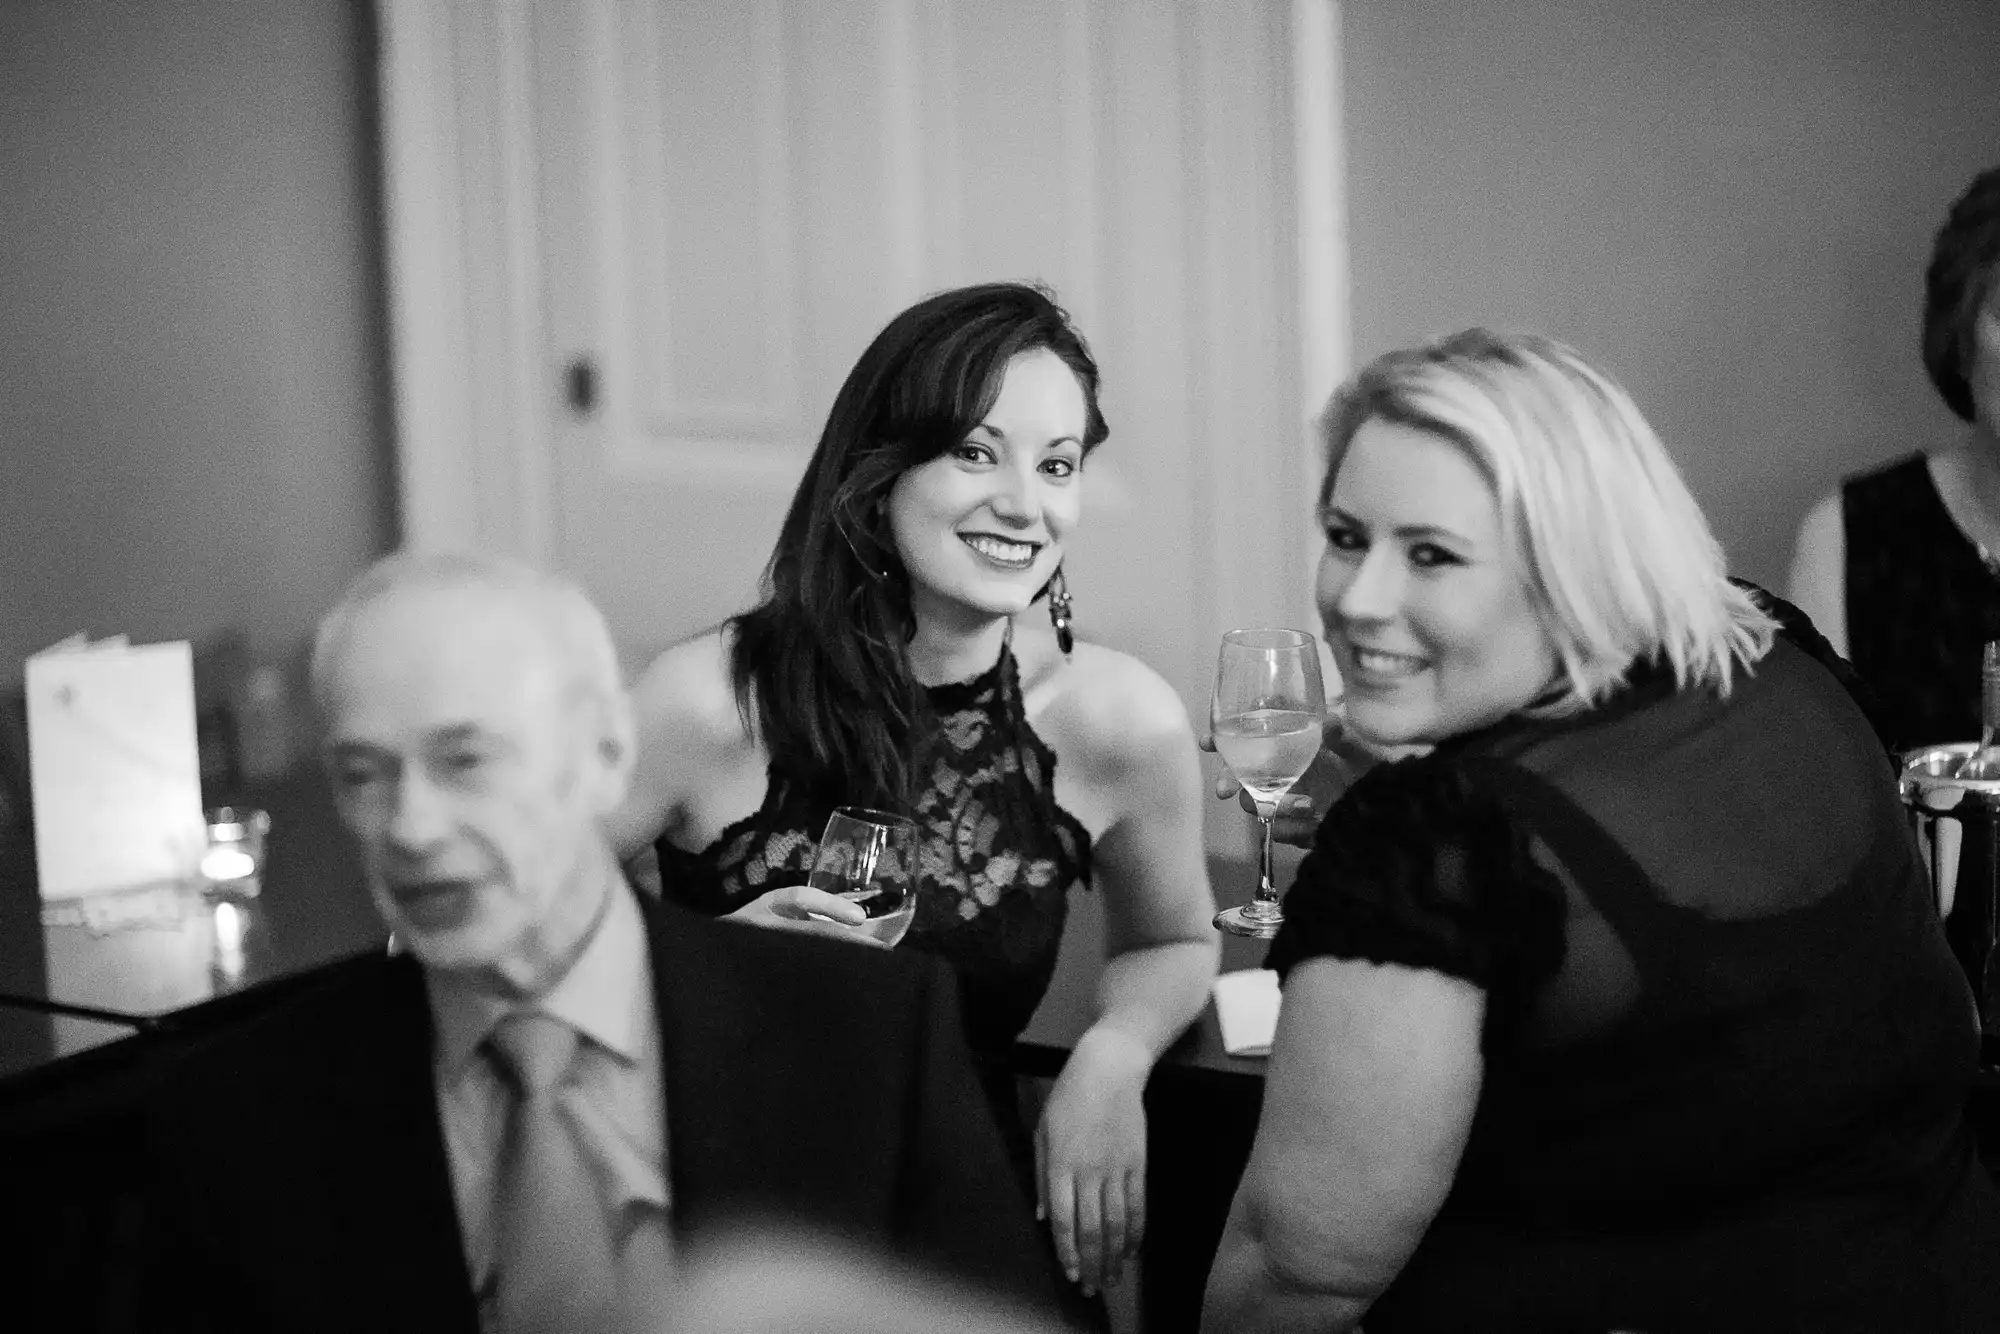 Two women smiling and sitting at a table during a formal event, with a blurred man in the foreground.